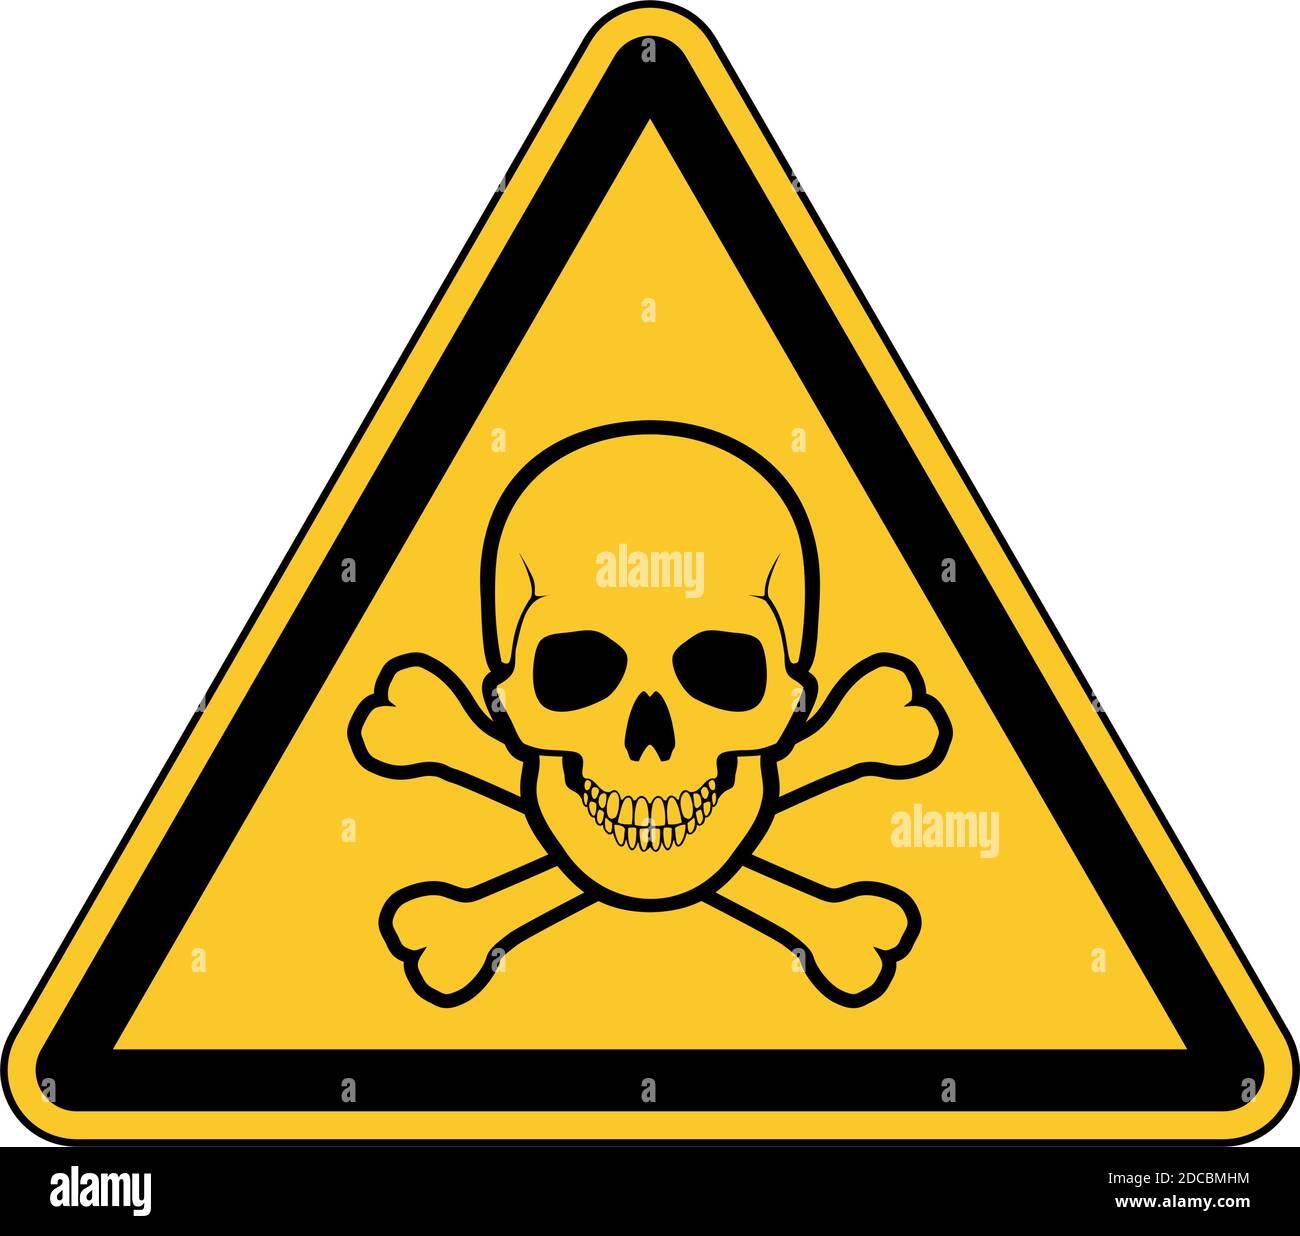 Yellow warning or danger road sign with skull and crossbones vector illustration Stock Vector